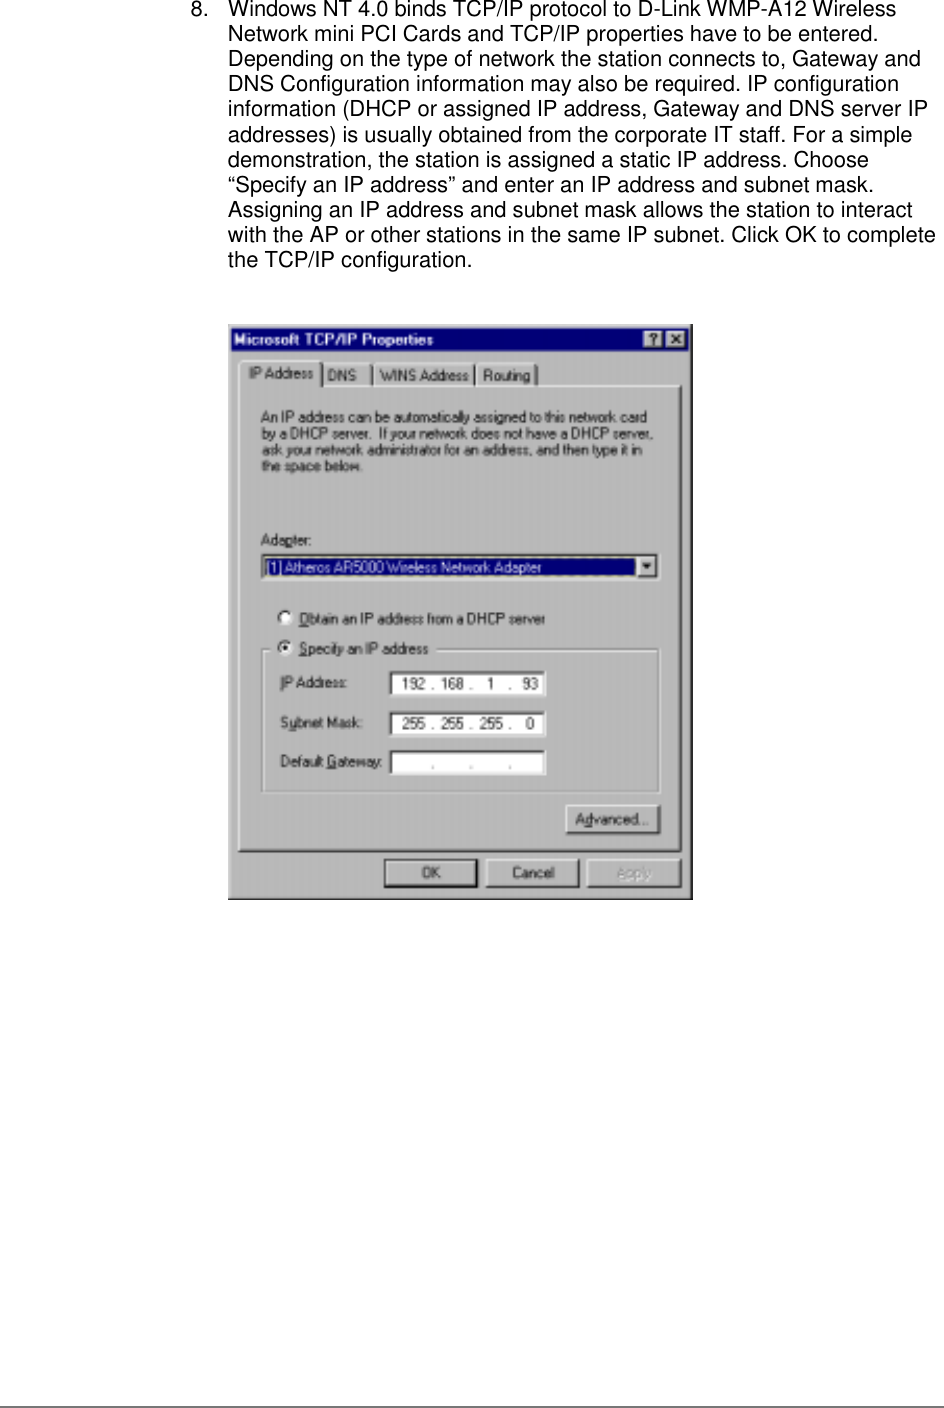 8.  Windows NT 4.0 binds TCP/IP protocol to D-Link WMP-A12 WirelessNetwork mini PCI Cards and TCP/IP properties have to be entered.Depending on the type of network the station connects to, Gateway andDNS Configuration information may also be required. IP configurationinformation (DHCP or assigned IP address, Gateway and DNS server IPaddresses) is usually obtained from the corporate IT staff. For a simpledemonstration, the station is assigned a static IP address. Choose“Specify an IP address” and enter an IP address and subnet mask.Assigning an IP address and subnet mask allows the station to interactwith the AP or other stations in the same IP subnet. Click OK to completethe TCP/IP configuration.